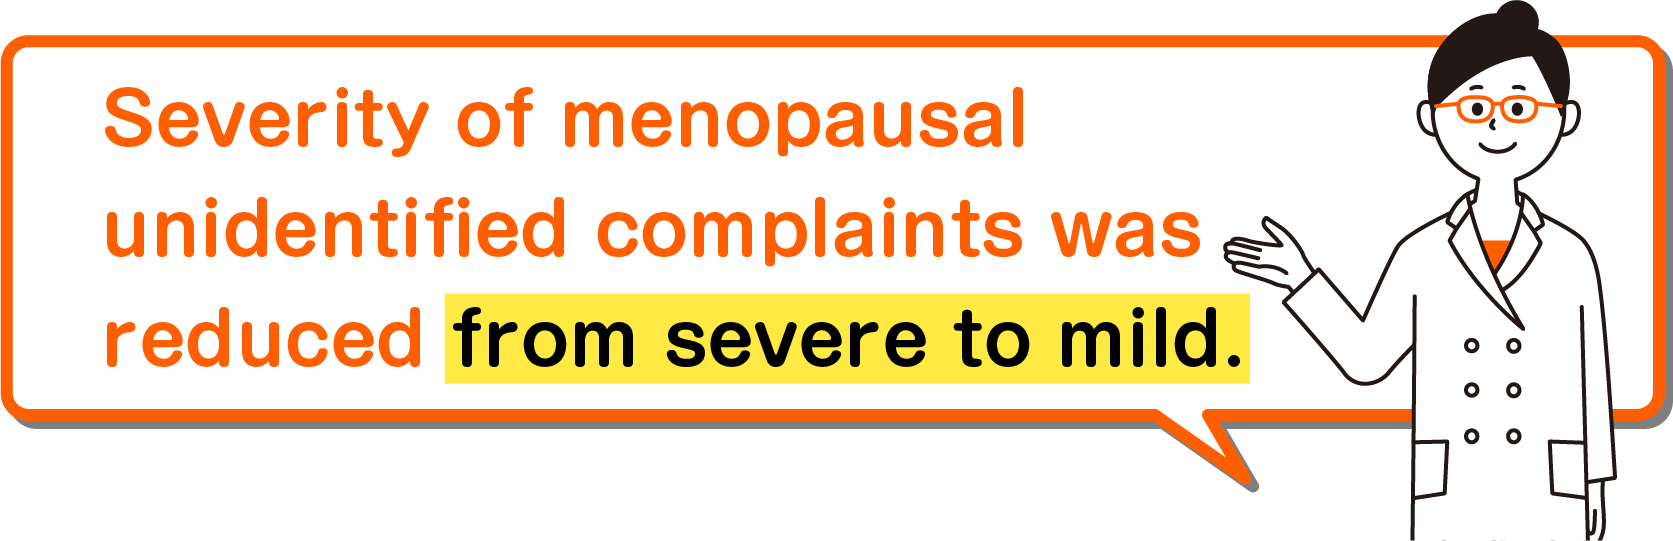 Severity of menopausal unidentified complaints was reduced from severe to mild.